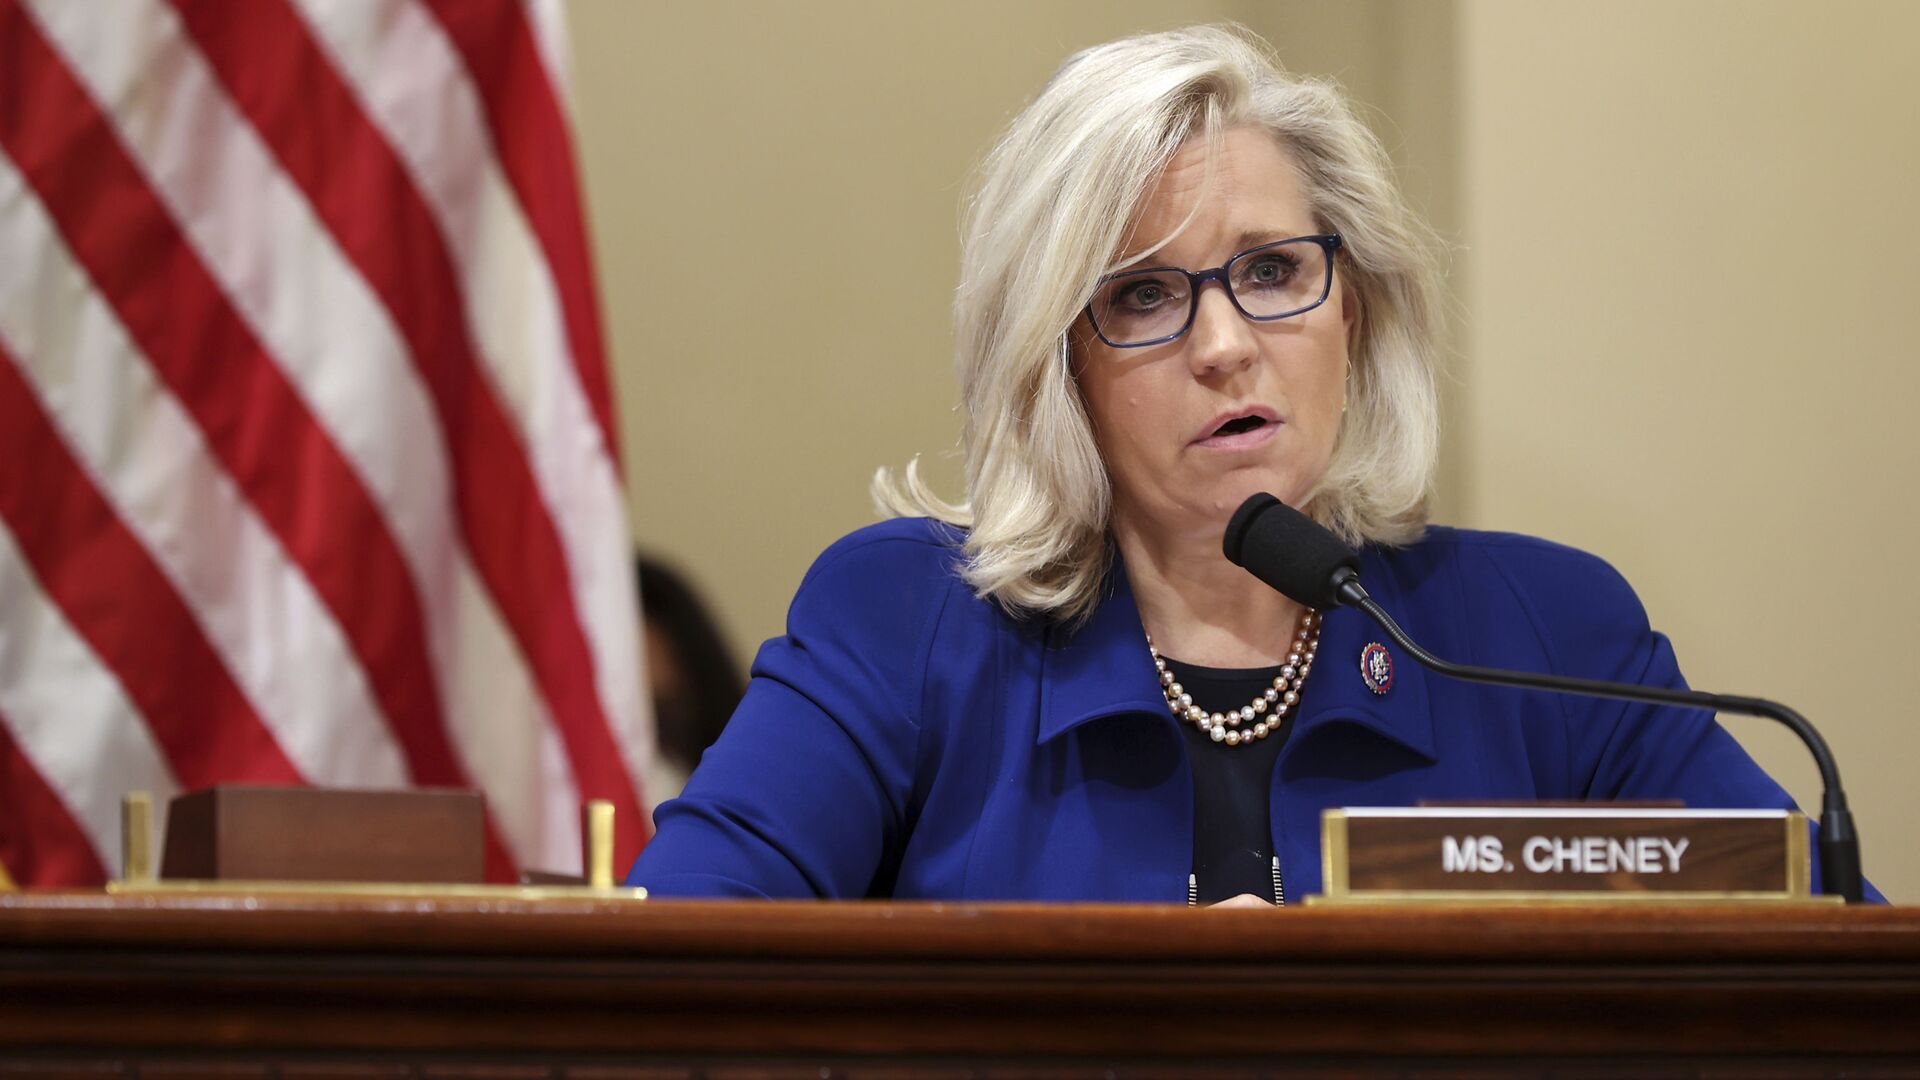 Rep. Liz Cheney, R-Wy., delivers opening remarks at the first hearing of the House select committee hearing on the Jan. 6 attack on Capitol Hill in Washington, Tuesday, July 27, 2021. - Sputnik International, 1920, 22.08.2021